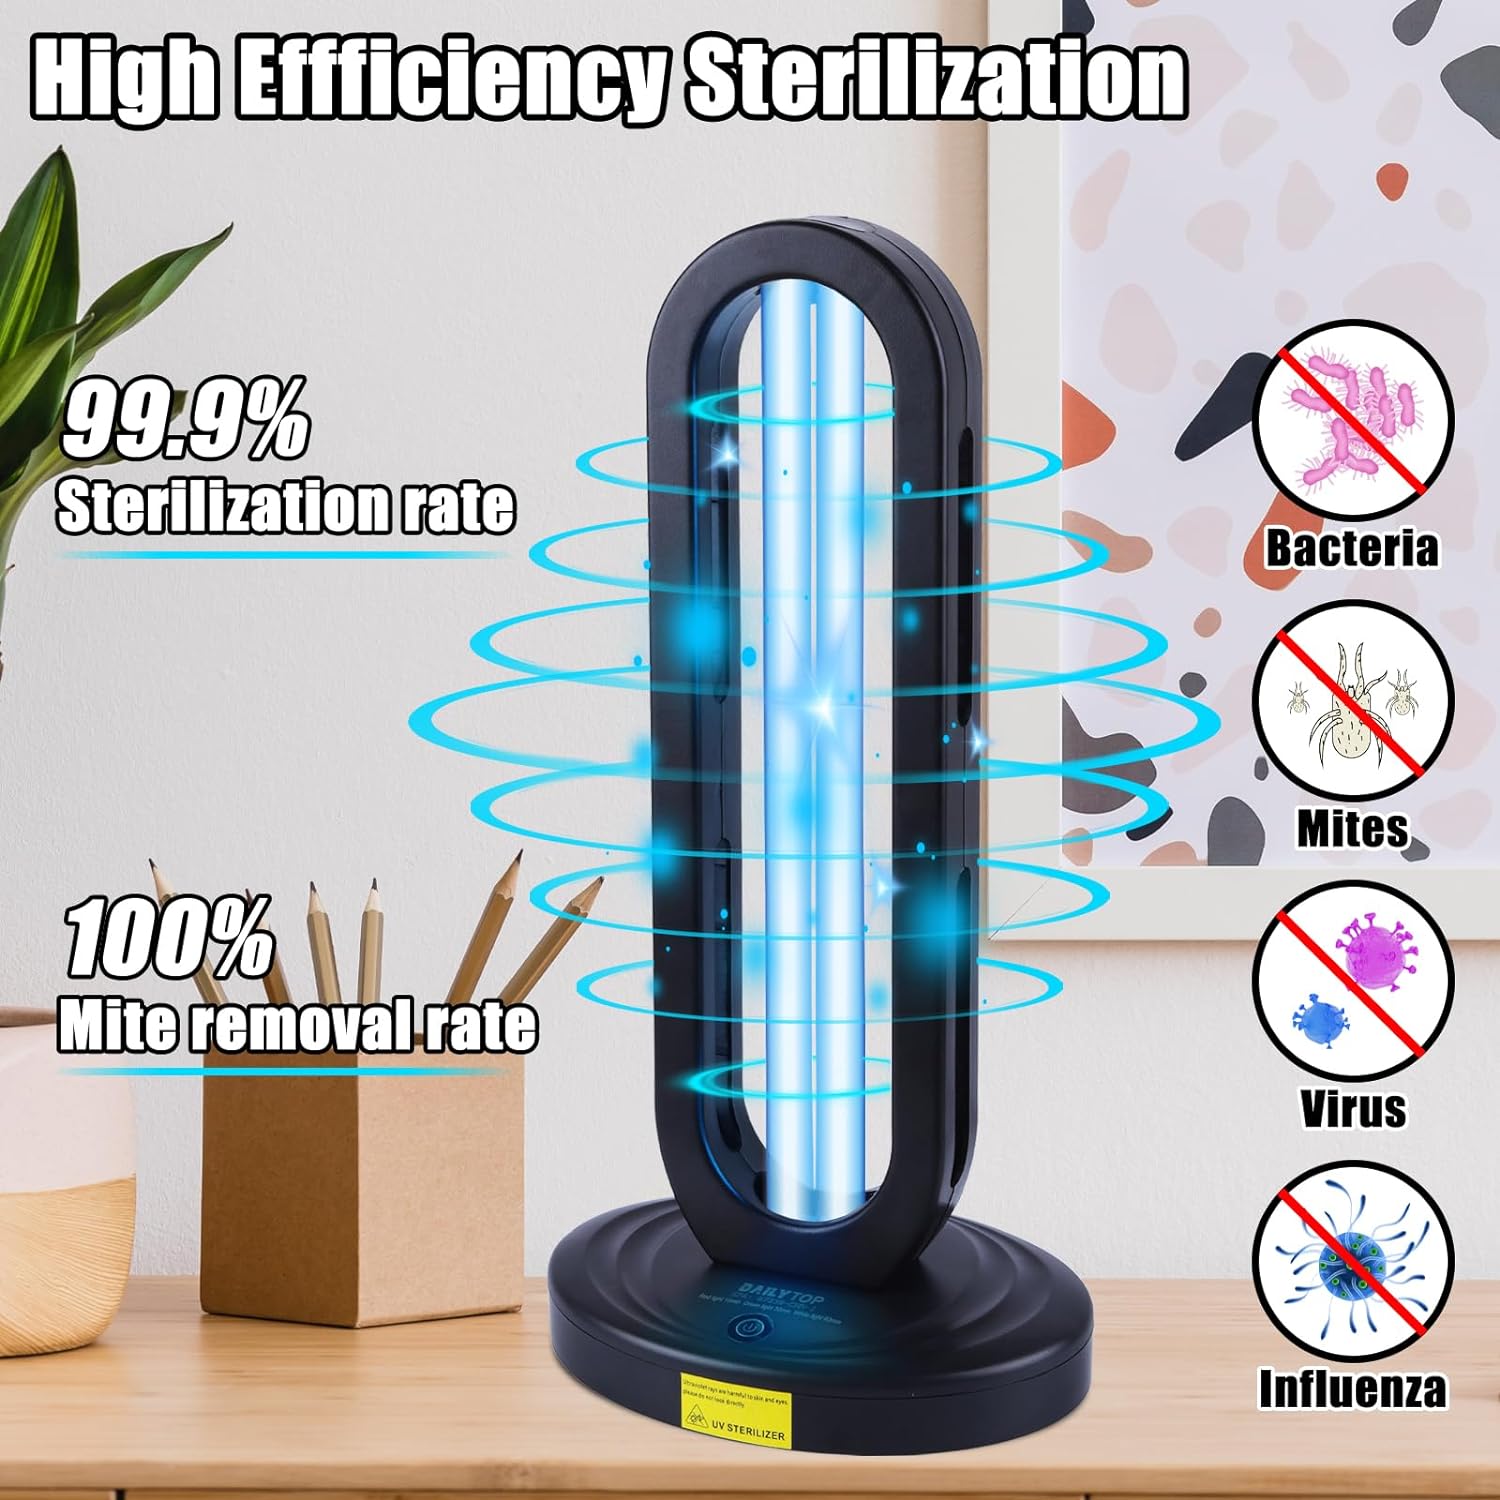 The Ultimate Solution: Powered Home Disinfection Tower